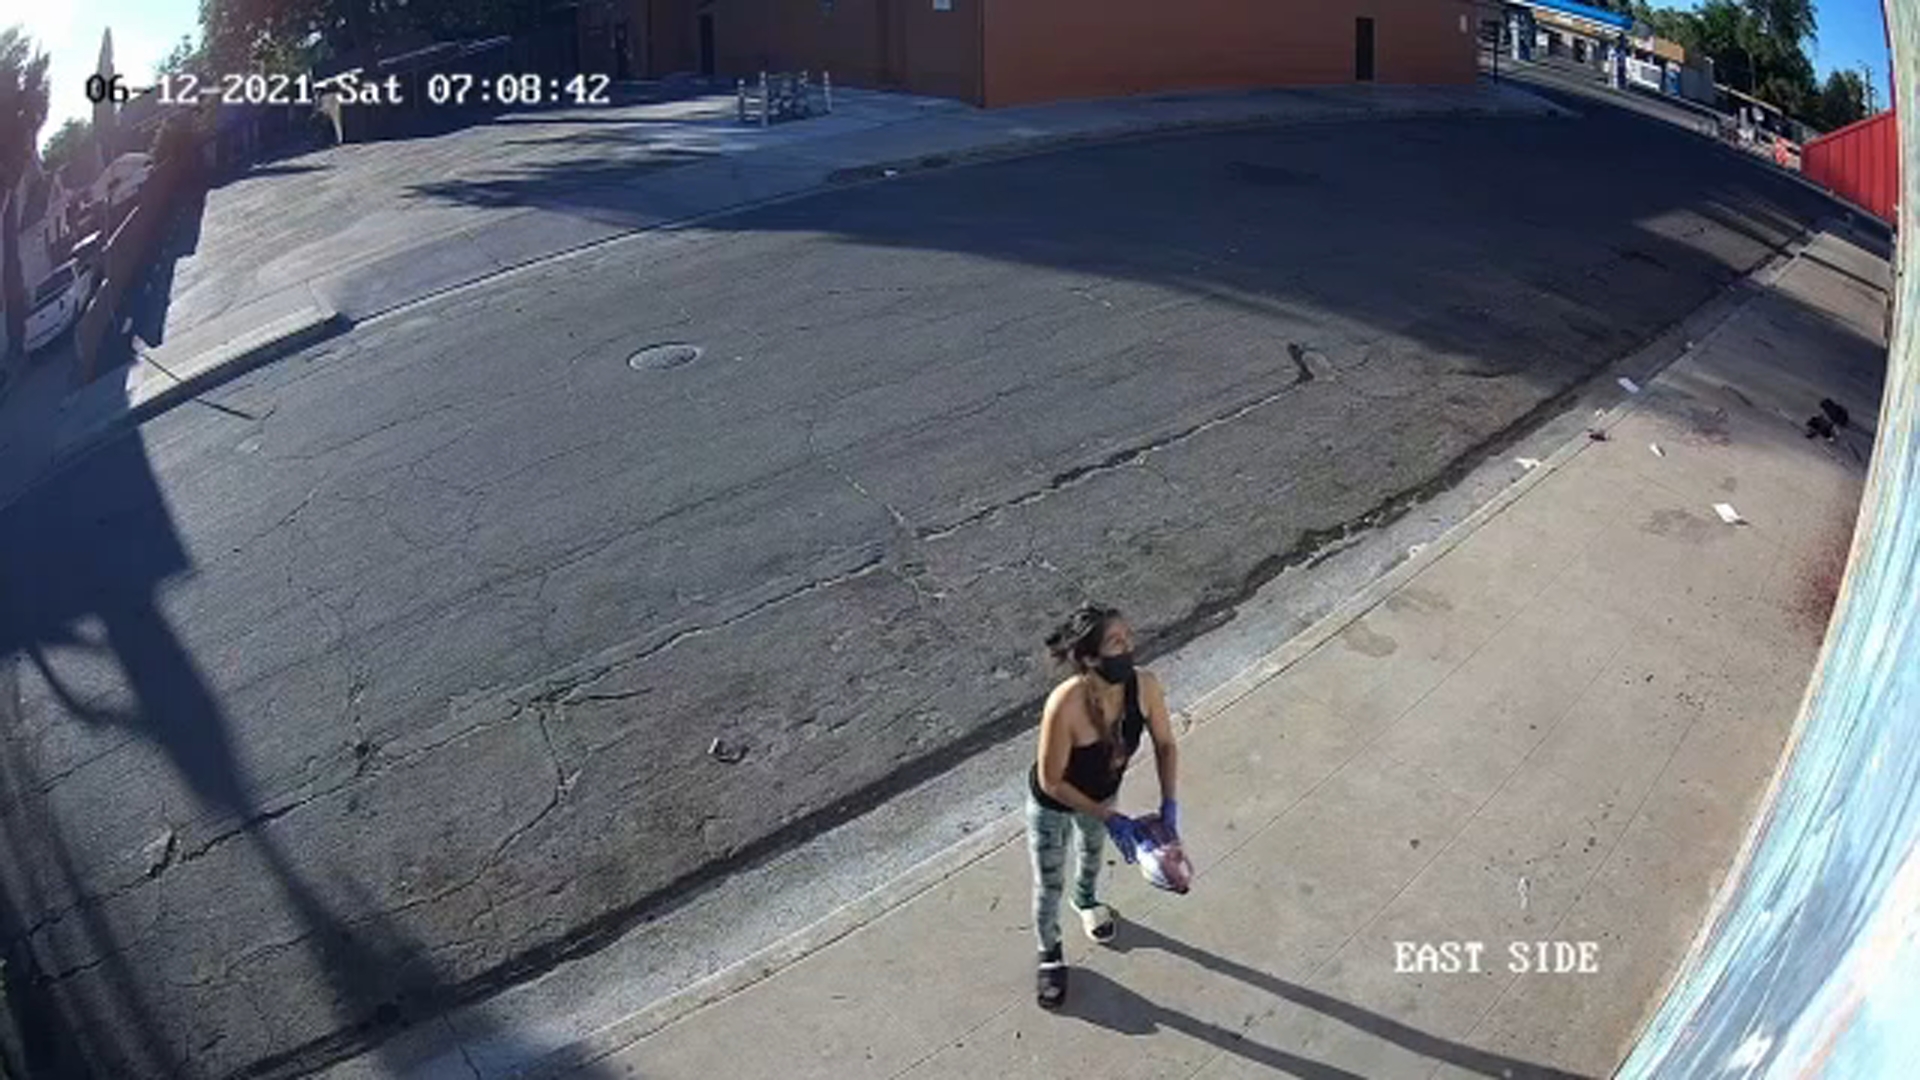 Police searching for central Fresno vandalism suspect